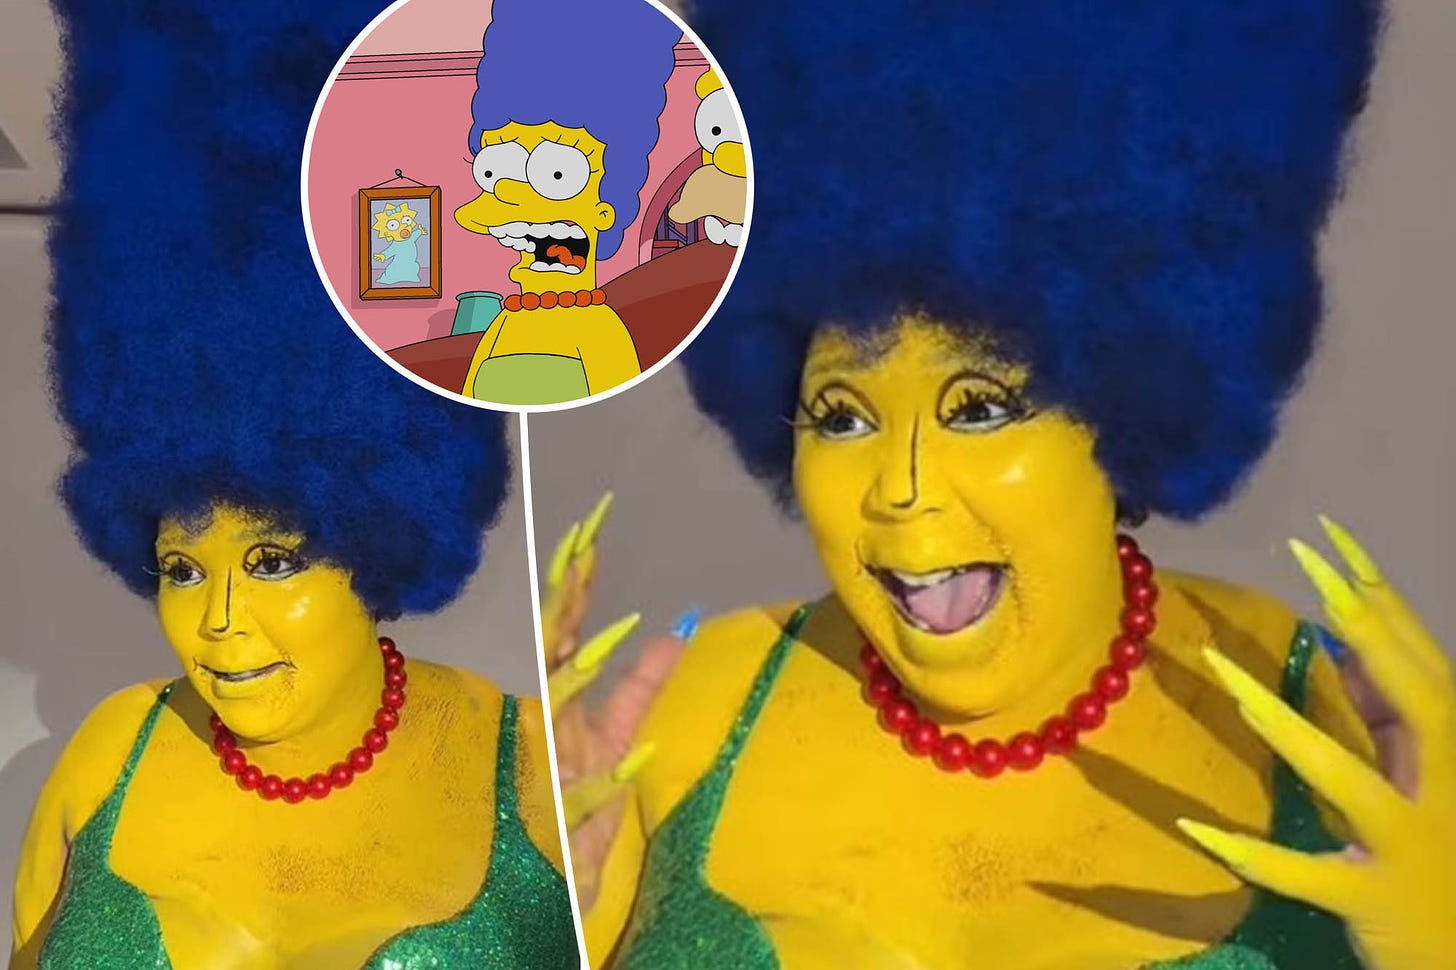 Lizzo wins Halloween 2022 with spot-on Marge Simpson costume